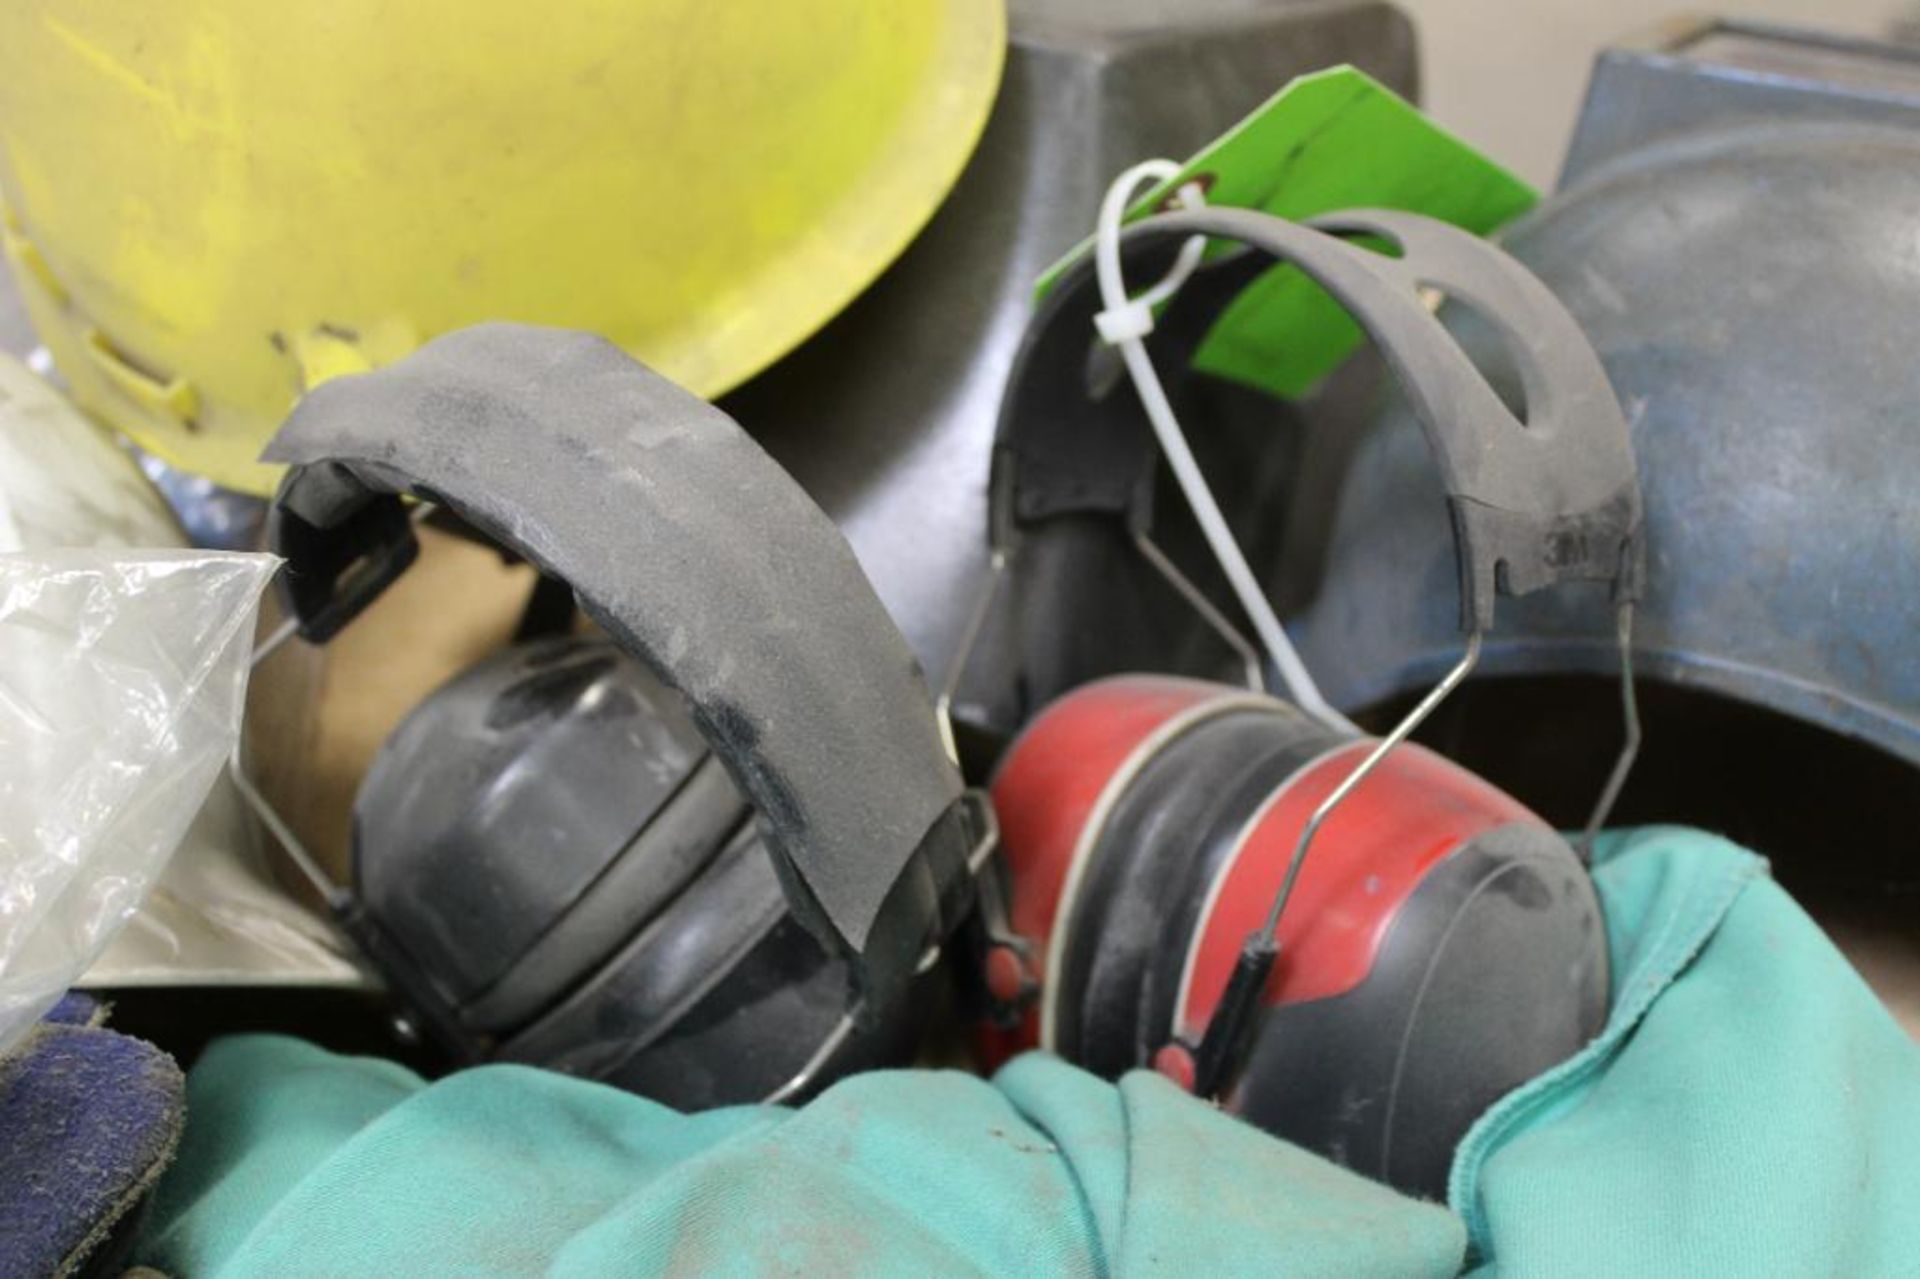 Lot of Assorted Welding Equipment to Include Welding Masks, Gloves, Jackets and Hardhats - Image 5 of 5